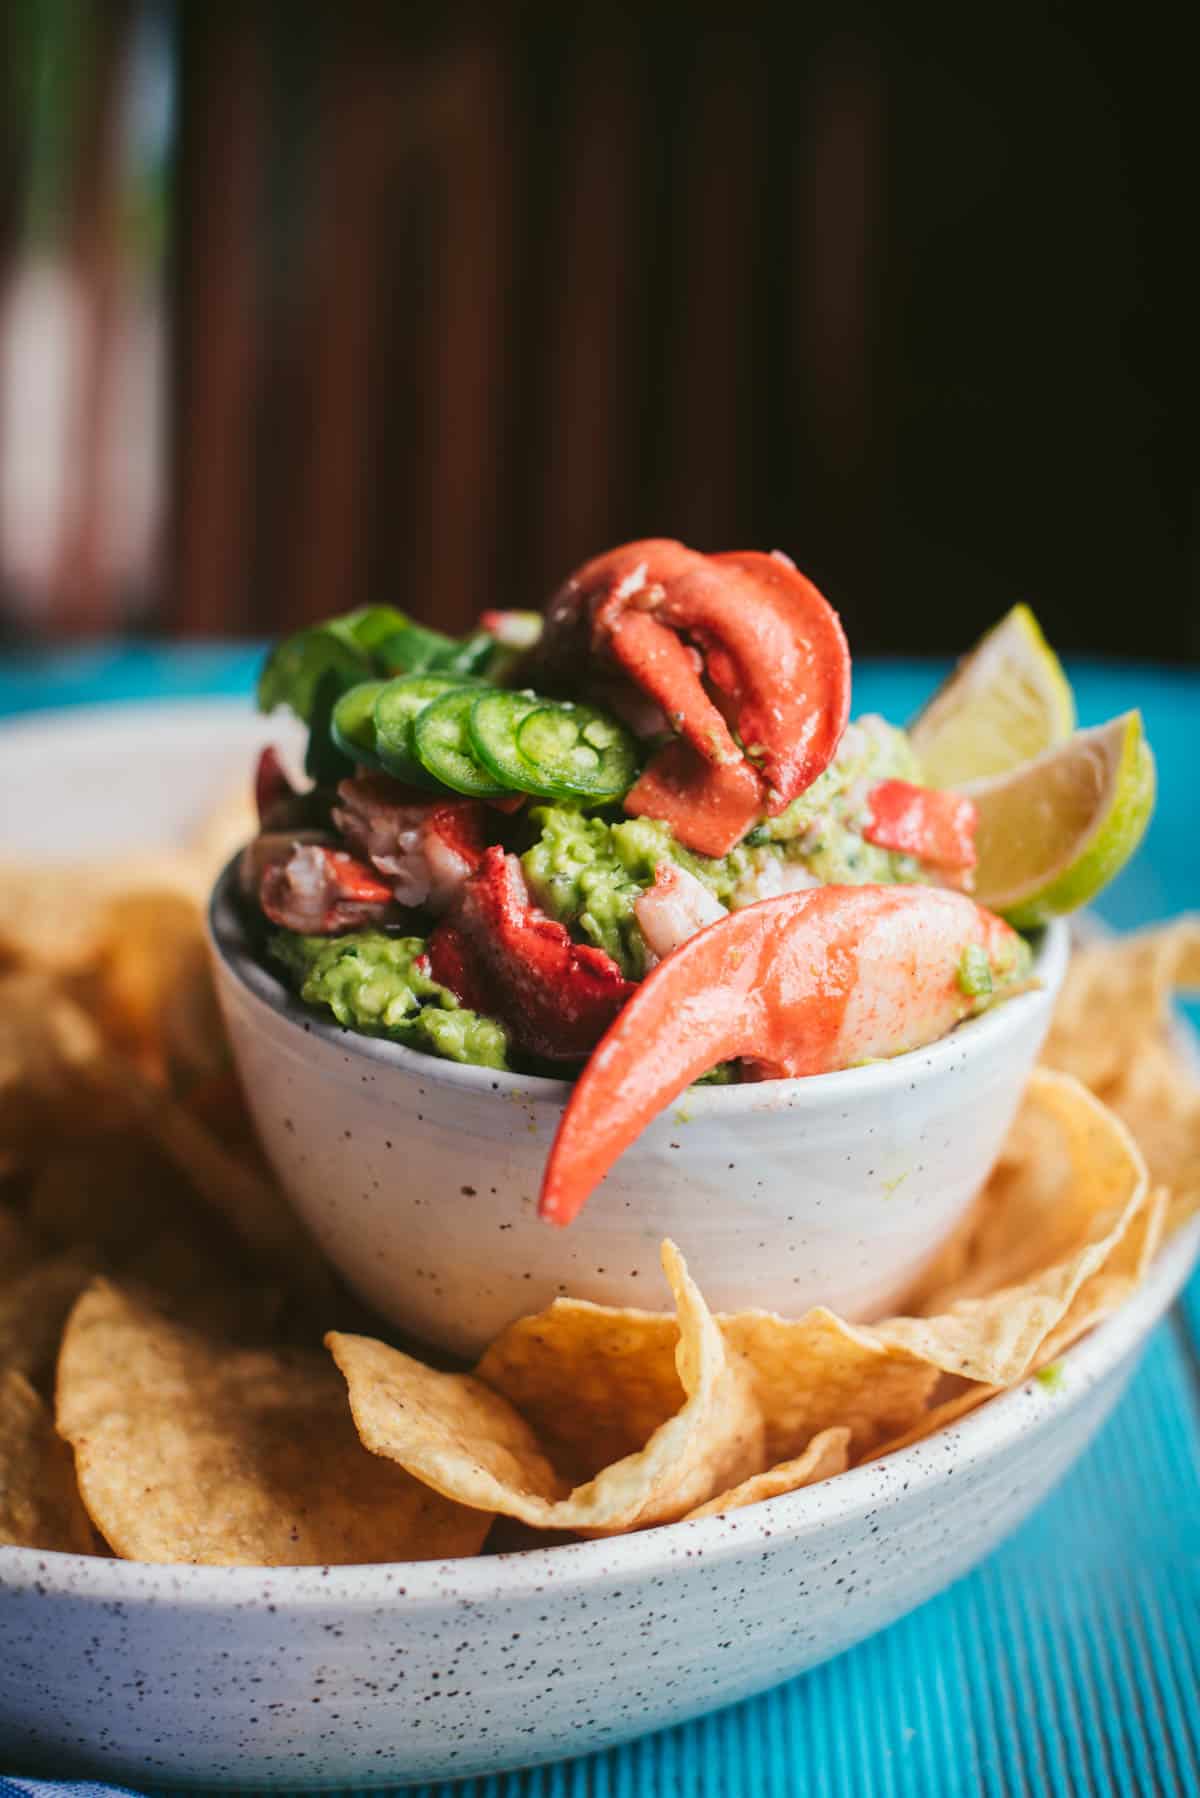 Lobster guacamole in a white terrazzo bowl. The lobster tails are large and lay slightly over the edge of the bowl, there is fresh jalapenos on top and 2 wedges of lime.
The bowl sits on a white terrazzo plate filled with chips to dip.